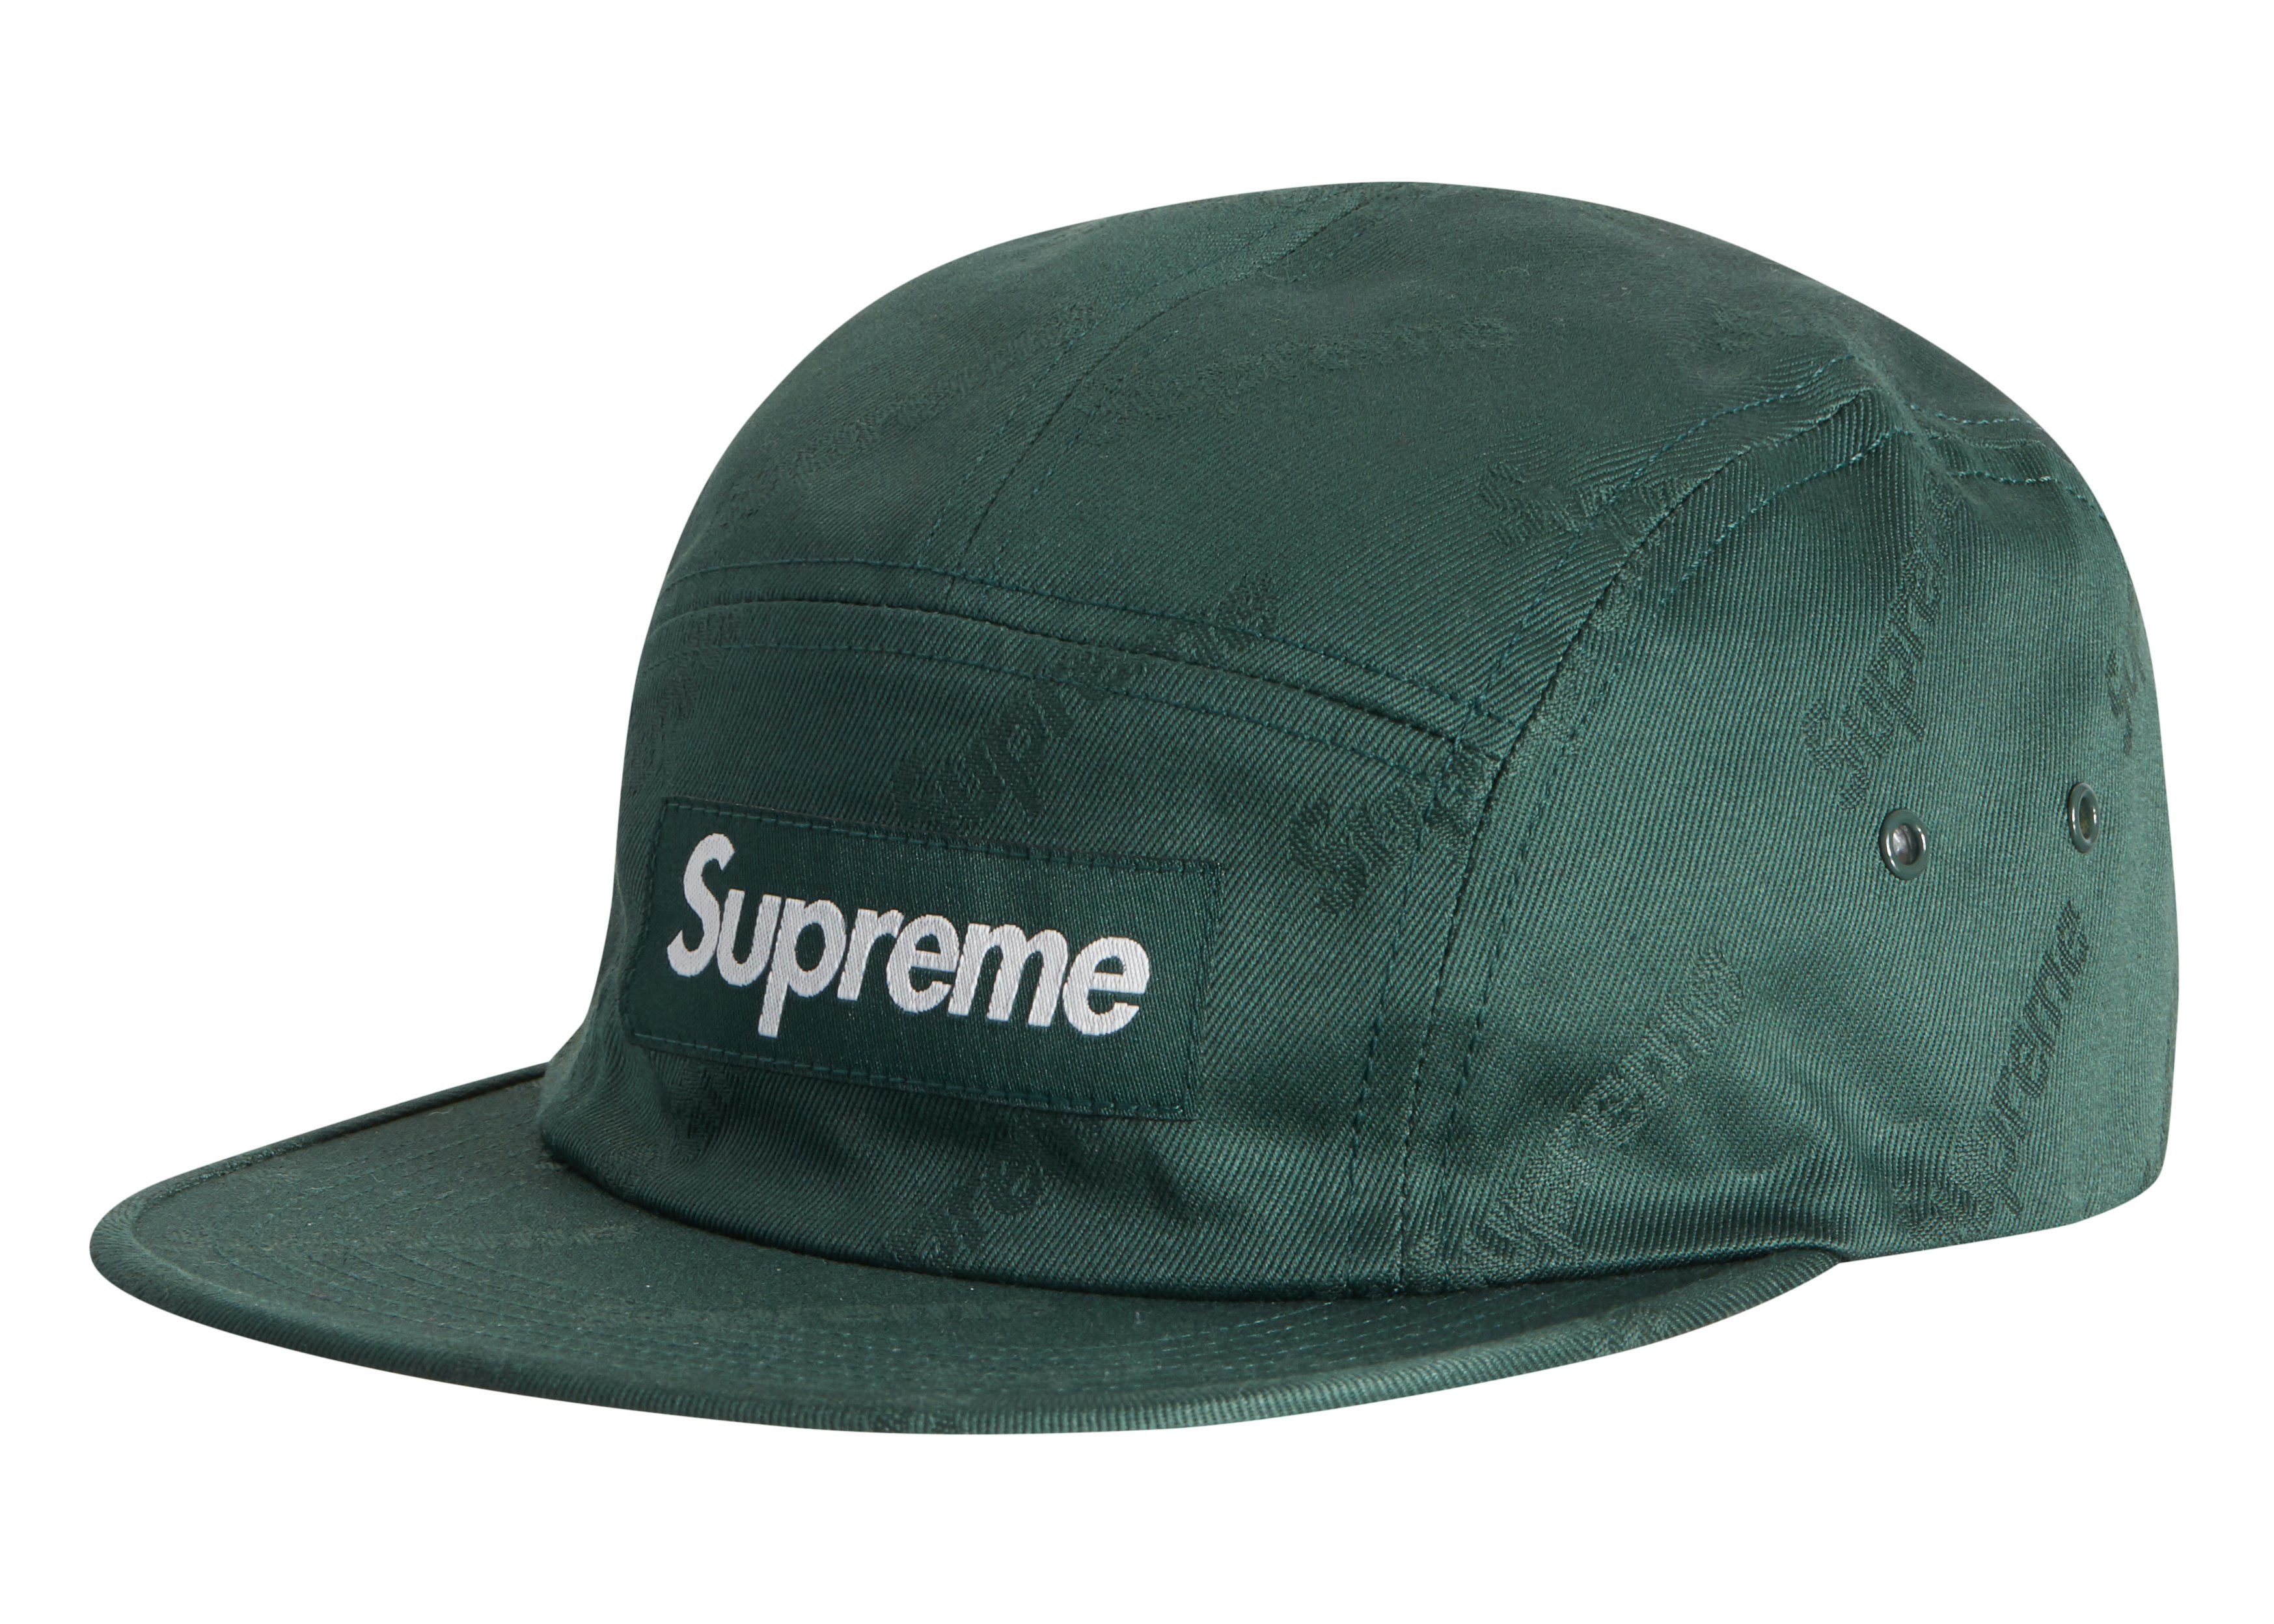 Supreme Jacquard Logos Twill Camp Cap Forest Green - FW19 - KR